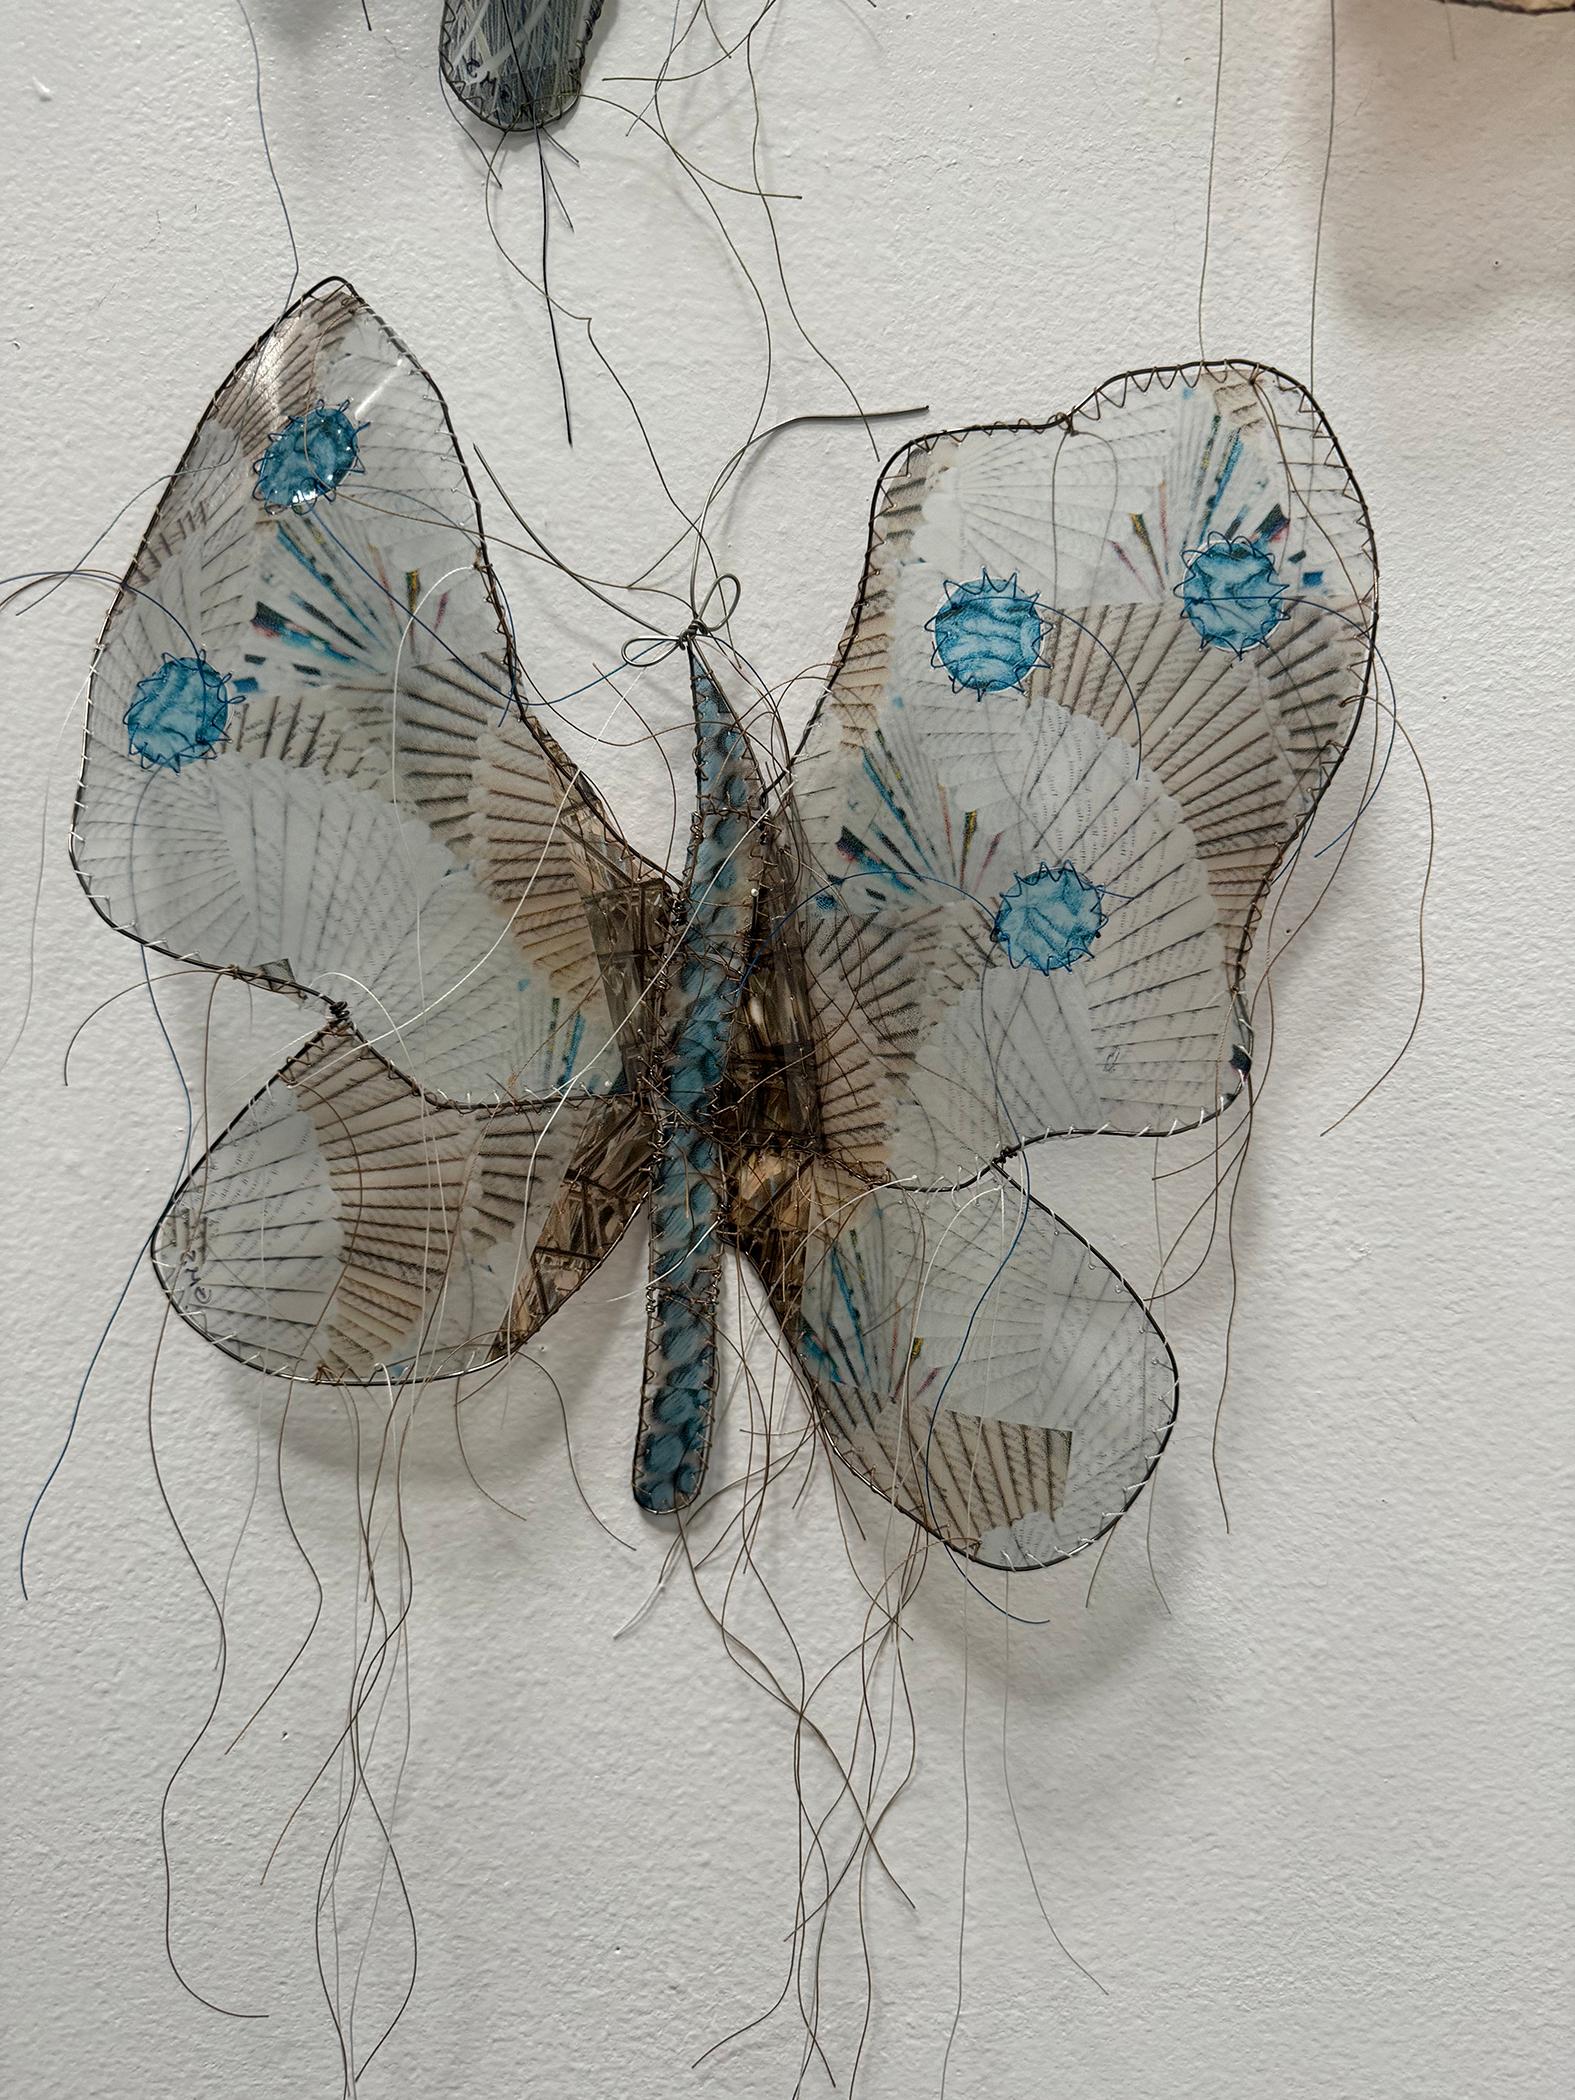 Eight Butterflies #2
37.0 x 29.0 x 1.5, 1.0 lbs 
Mixed Media
Hand signed by artist 

Artist's Commentary: 
